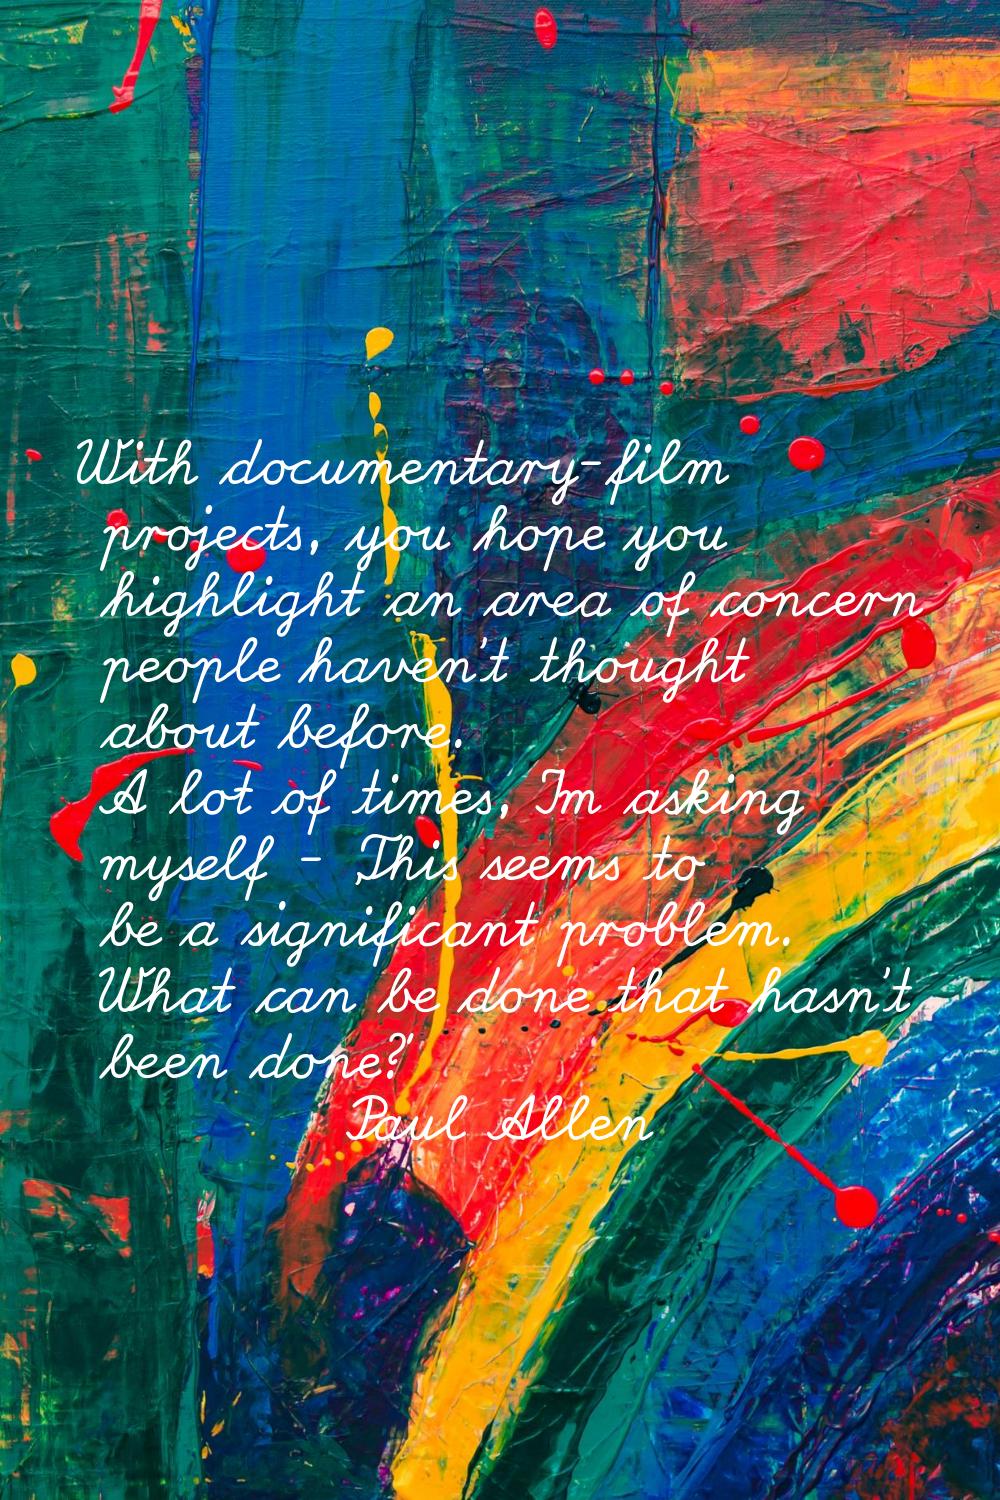 With documentary-film projects, you hope you highlight an area of concern people haven't thought ab